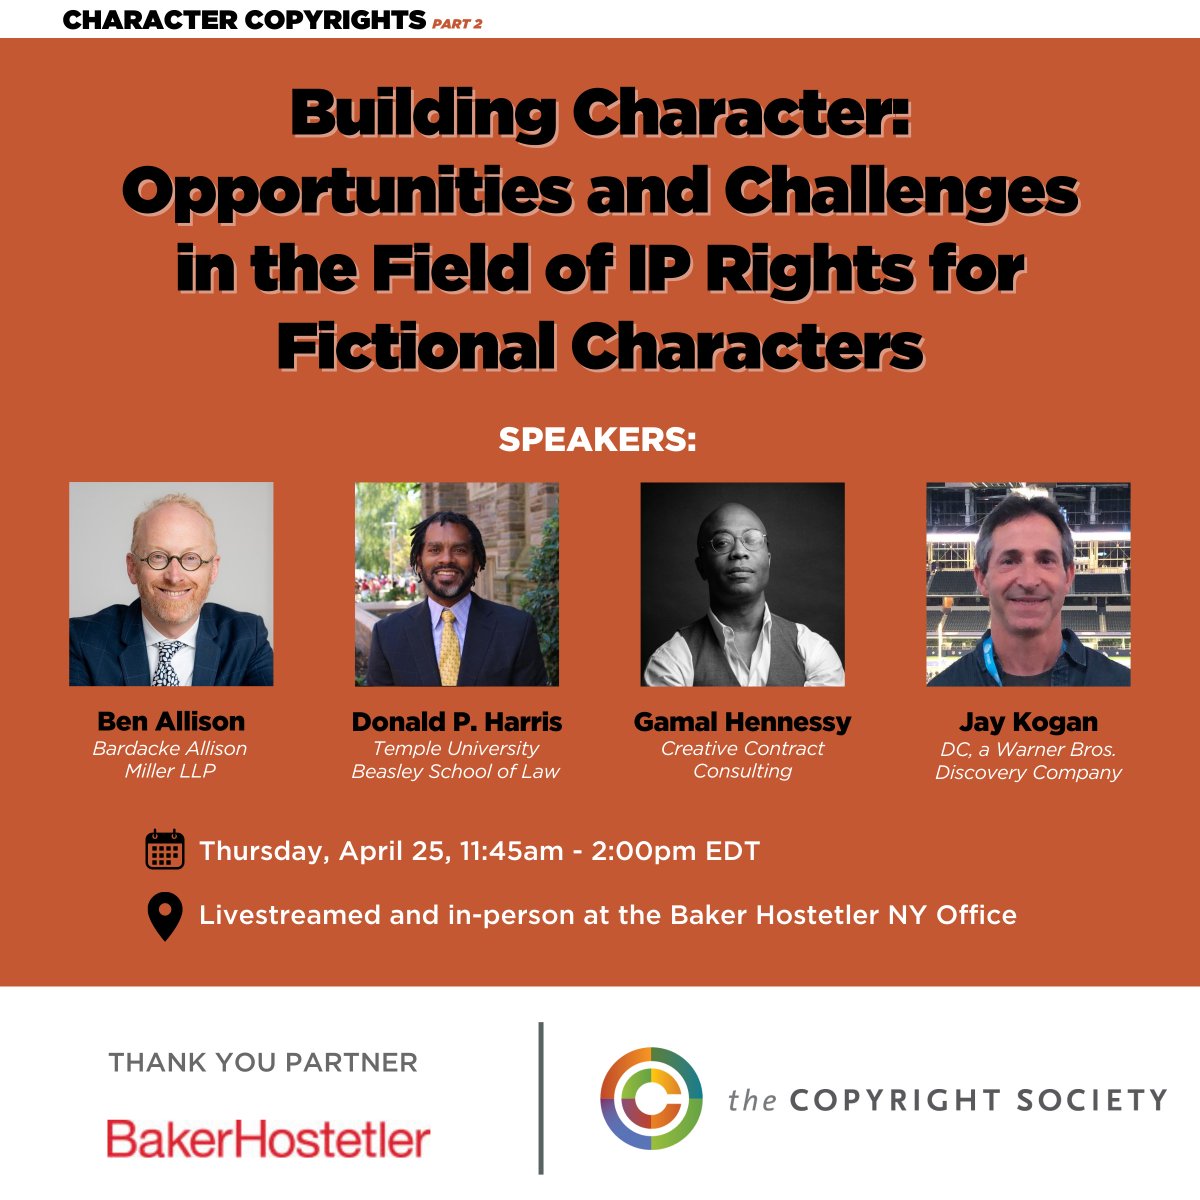 Join Ben Allison(Bardacke Allison Miller LLP), Donald P. Harris (@TempleLaw), @gamalhennessy (Creative Contract Consulting), and Jay Kogan (@wbd) for a lunch-time roundtable discussion about #characterprotection. ➡️copyrightsociety.org/event/characte…